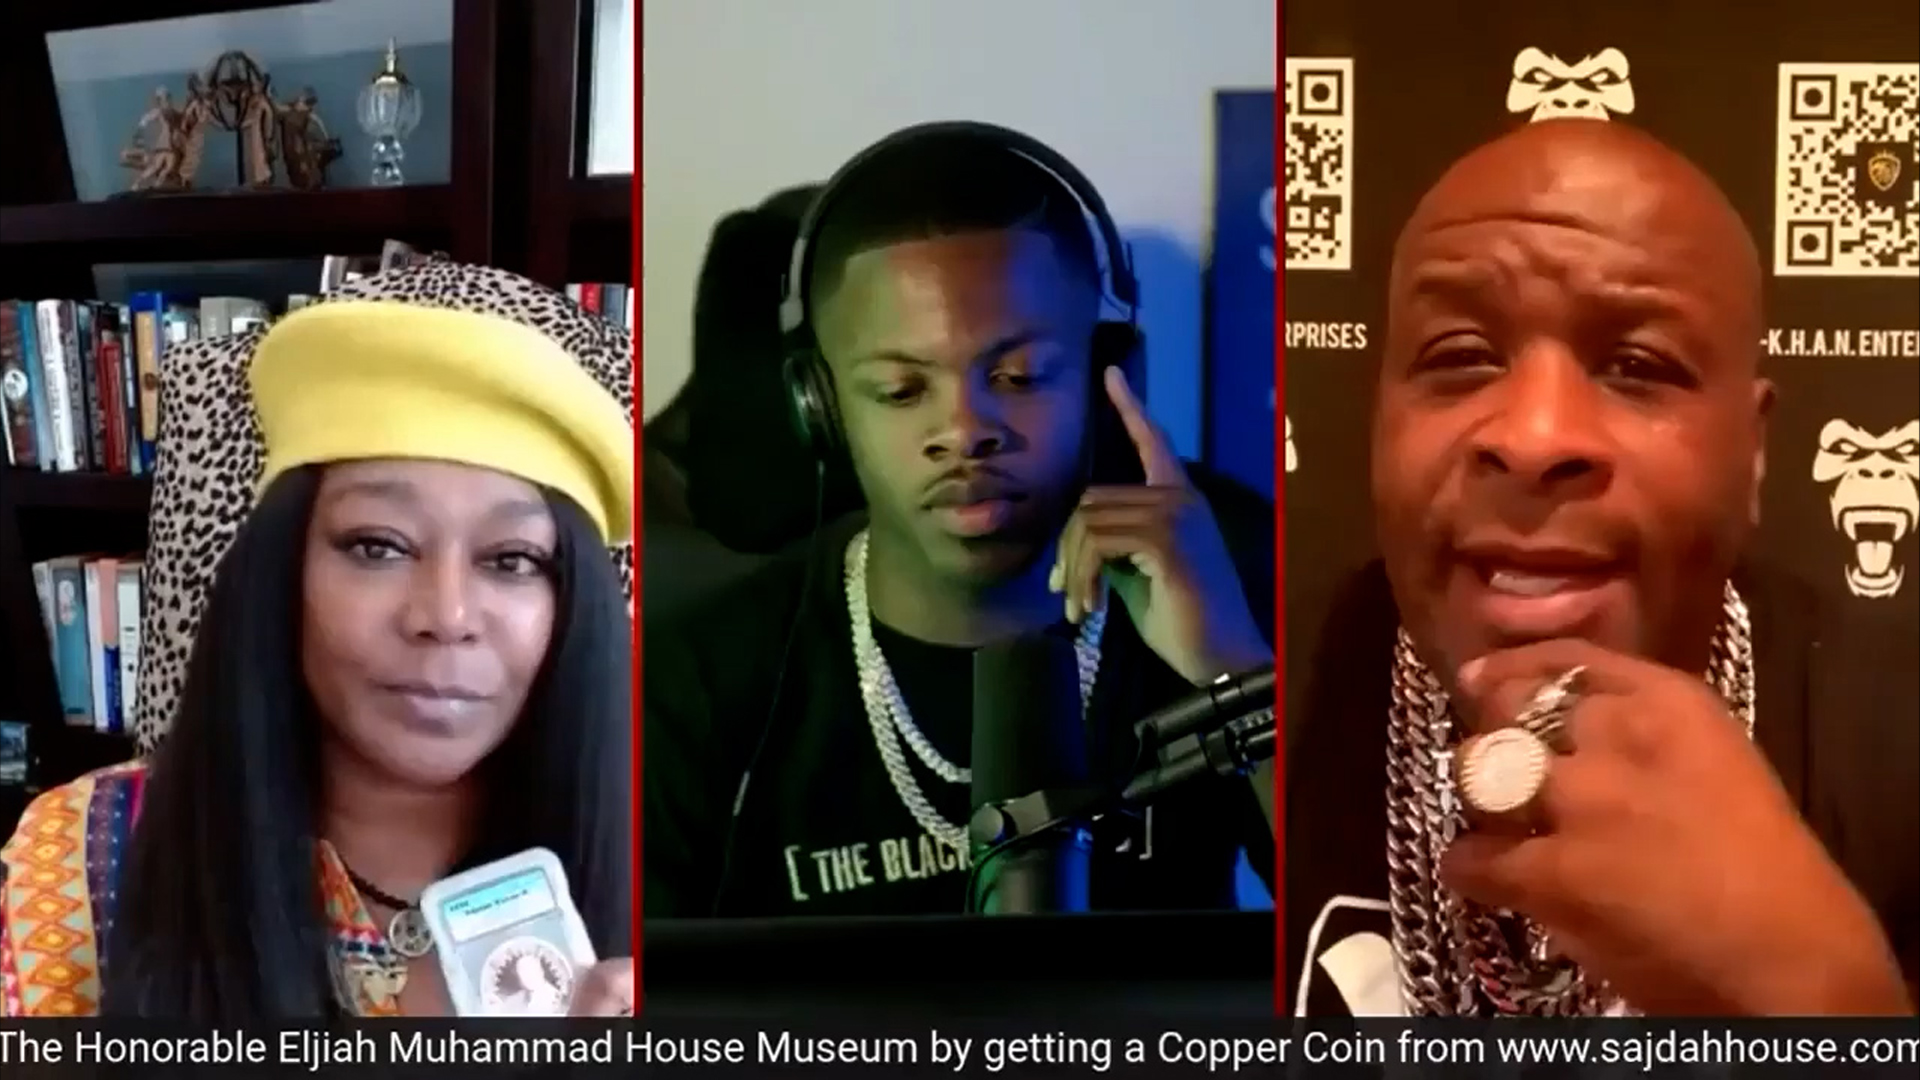 What Is The Most Honorable Elijah Muhammad House And Copper Coin About?